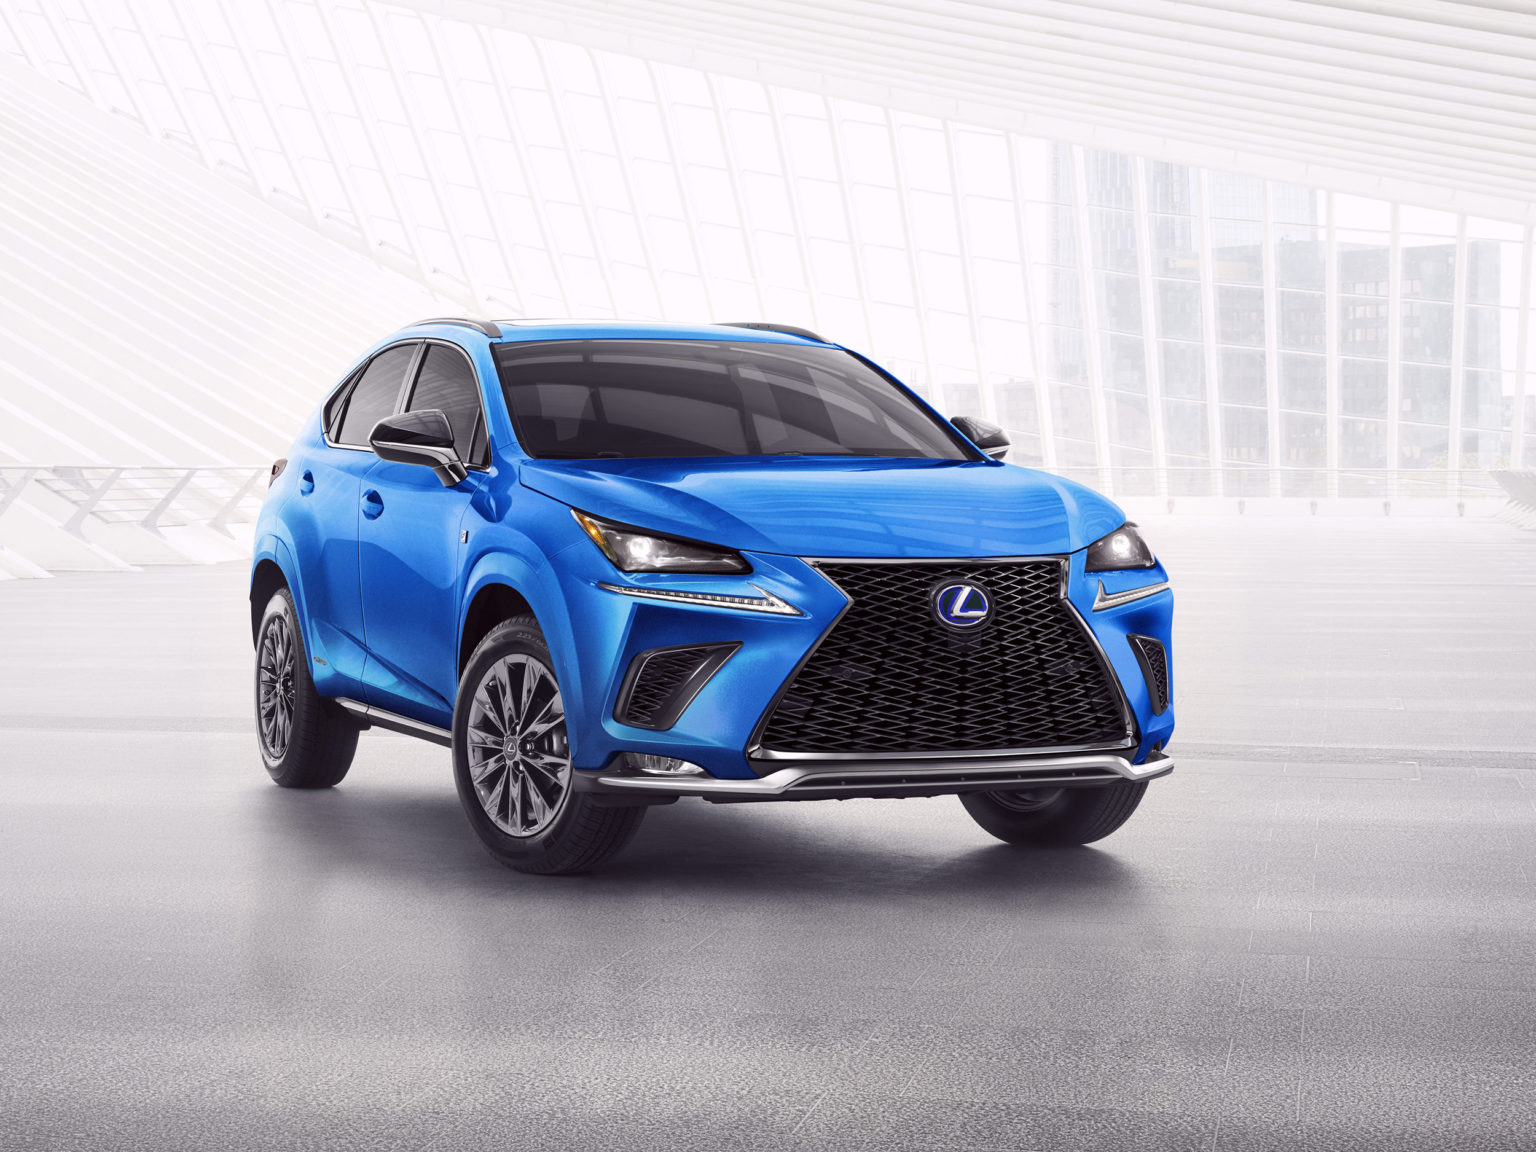 The 2021 Lexus NX F SPORT Black Line is a new, limited edition offering for the brand.